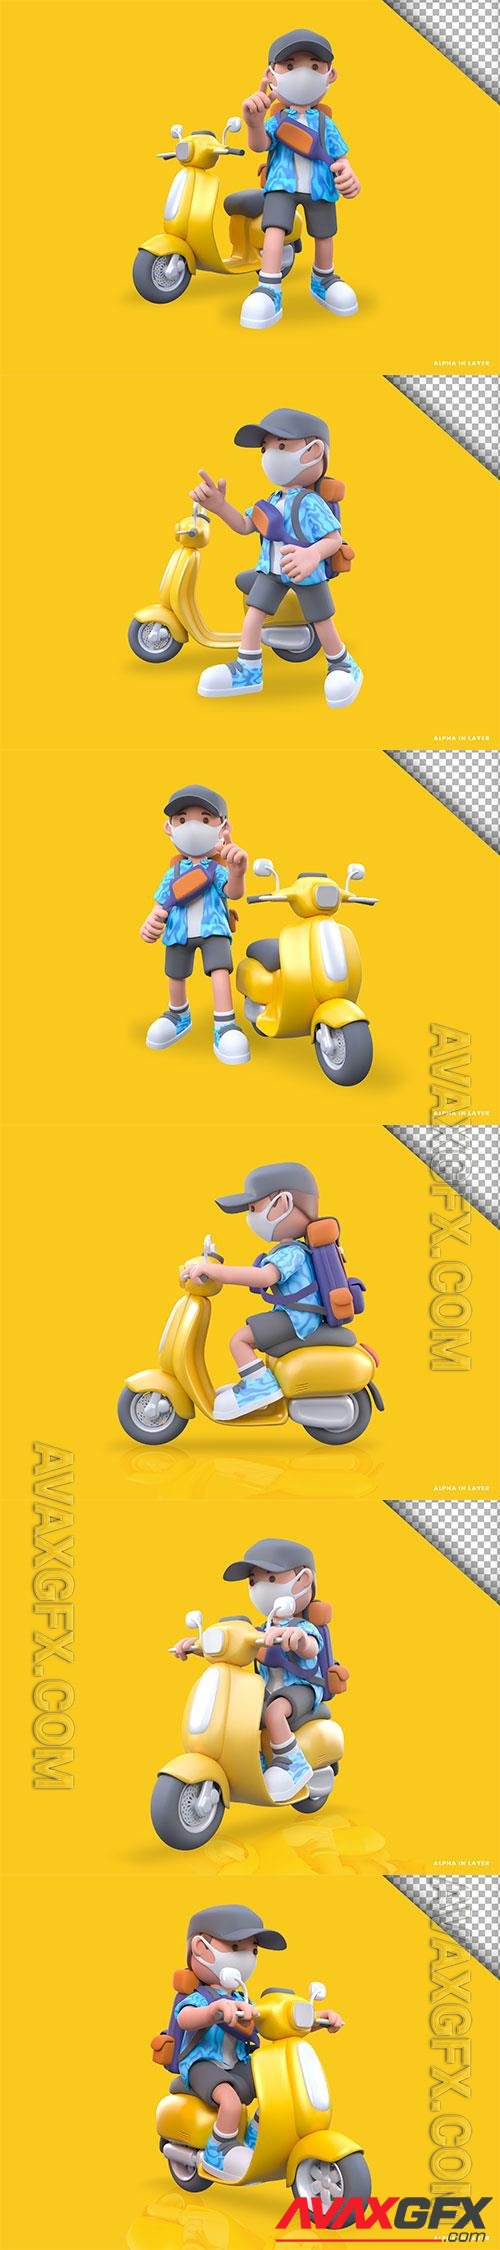 Boy ready to travel 3d rendering illustration Psd